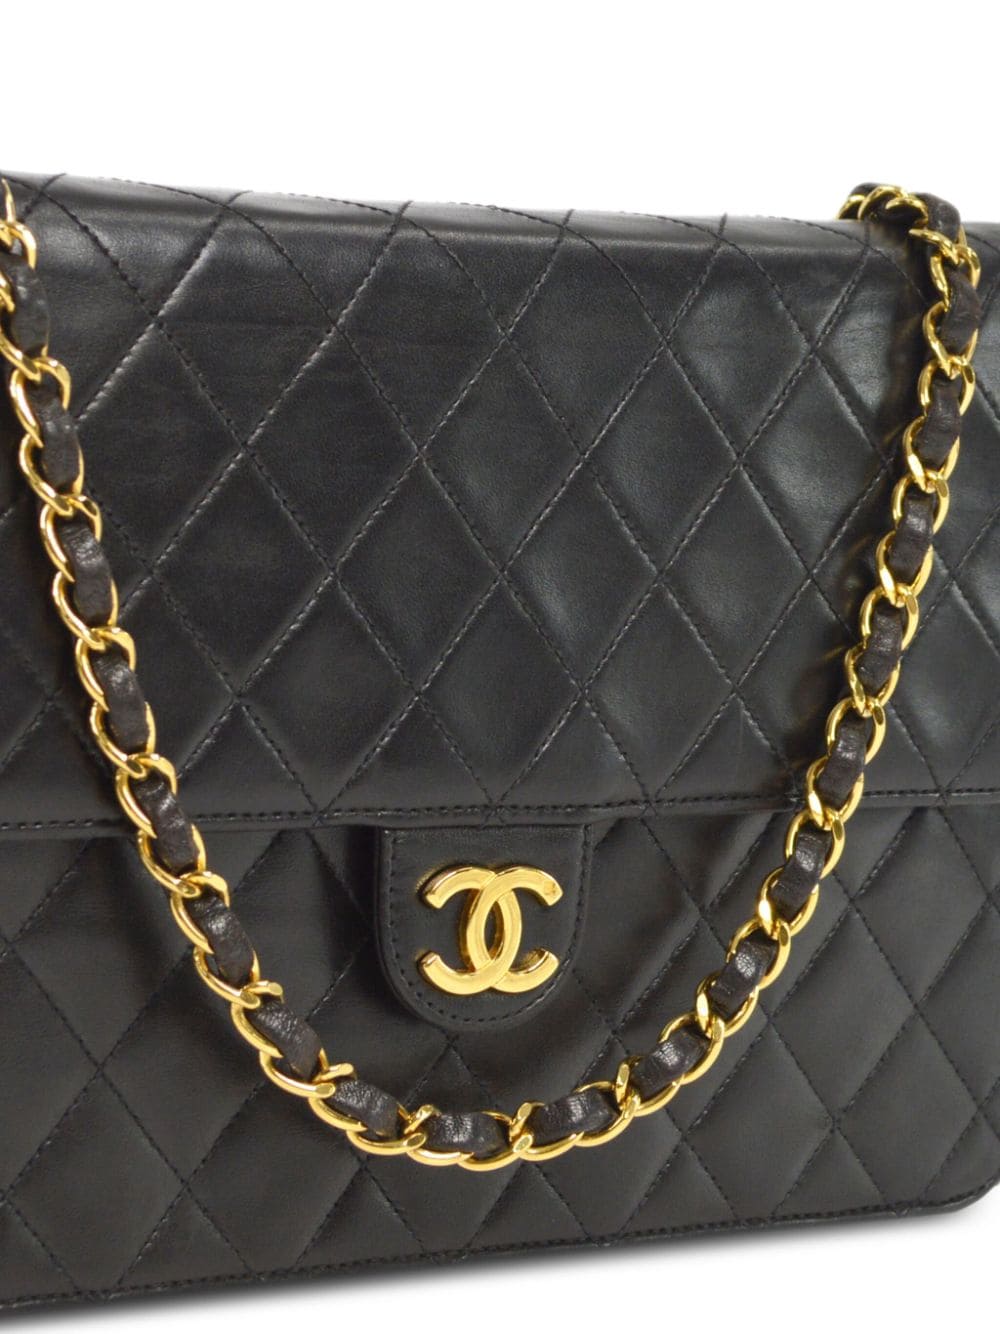 chanel suede shearling bag